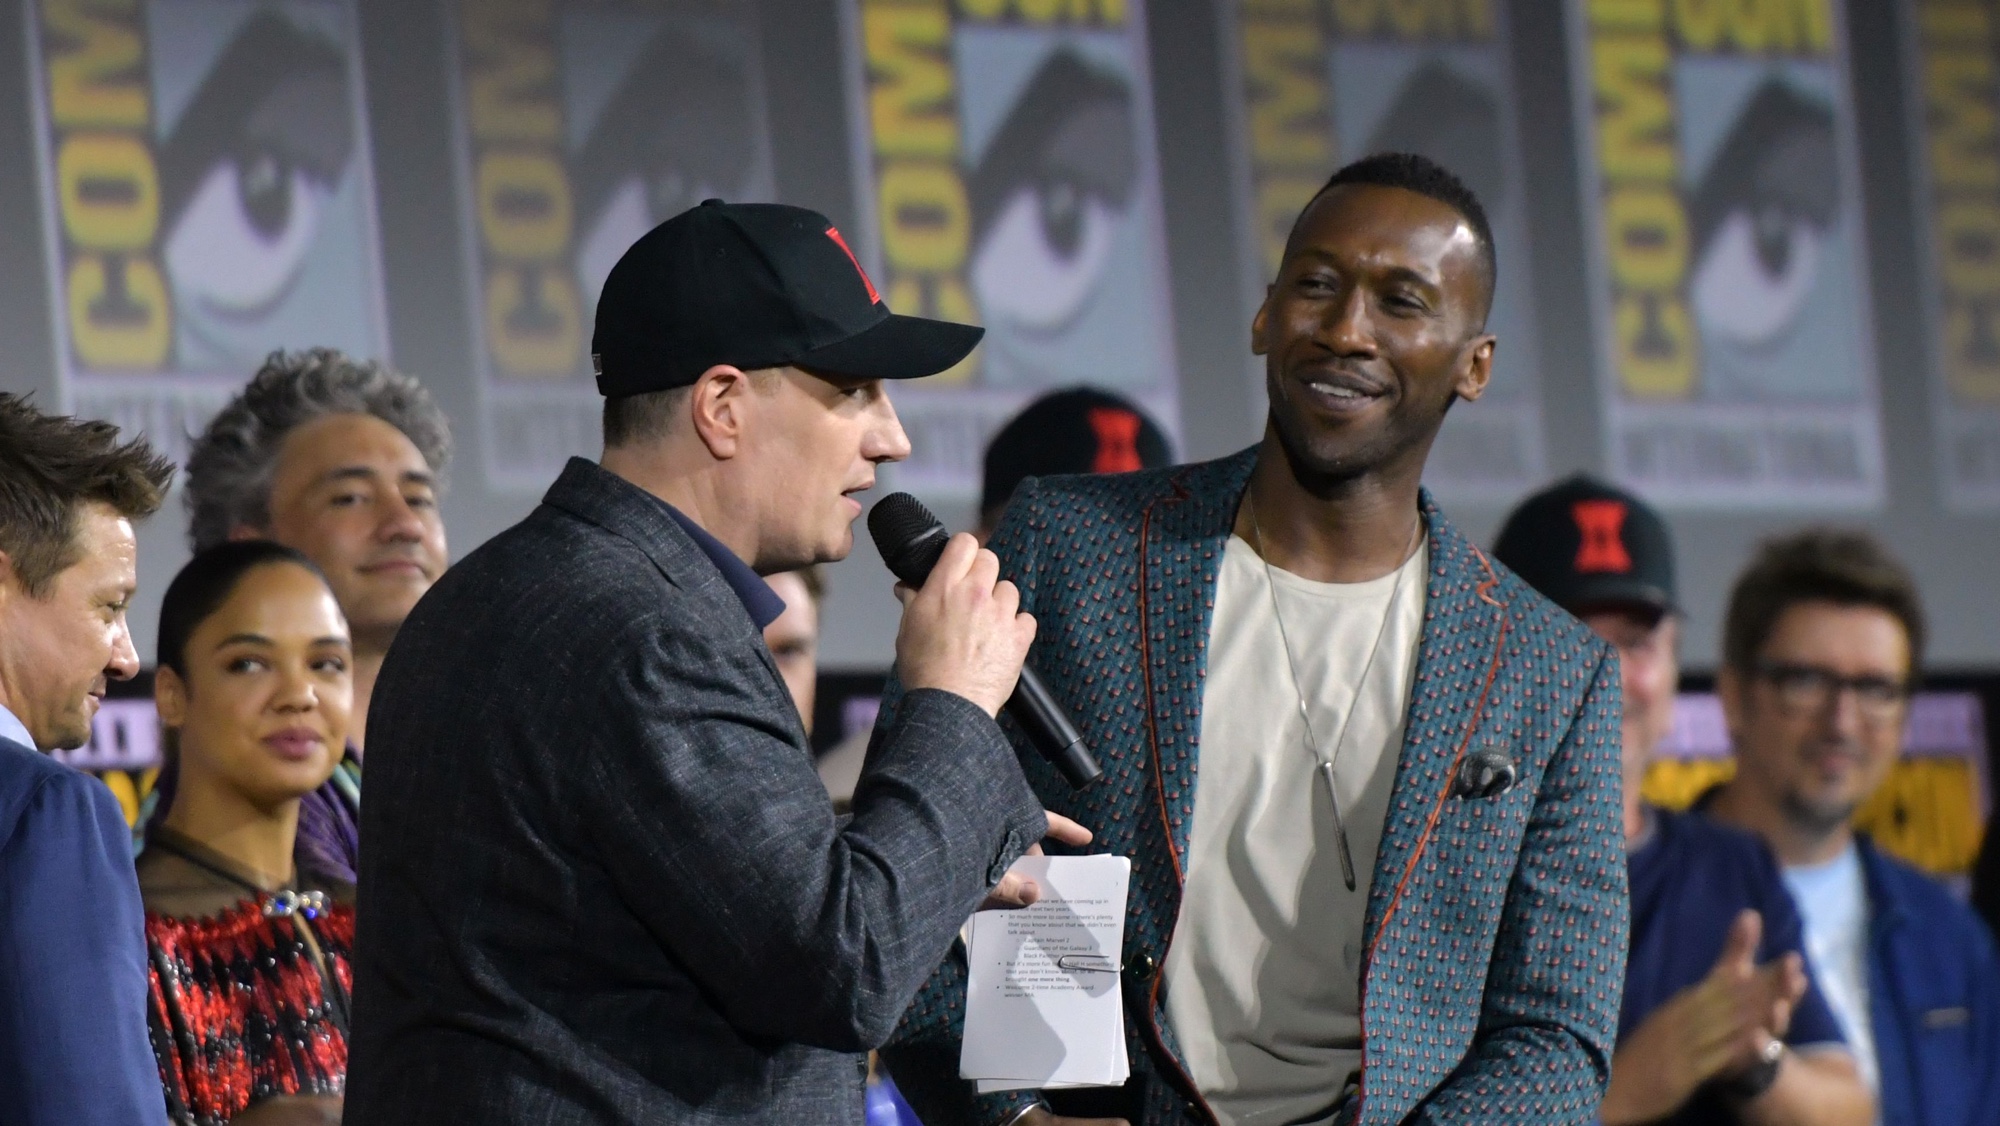 Kevin Feige and Mahershala Ali, the director and star of Blade, one of the upcoming marvel movies